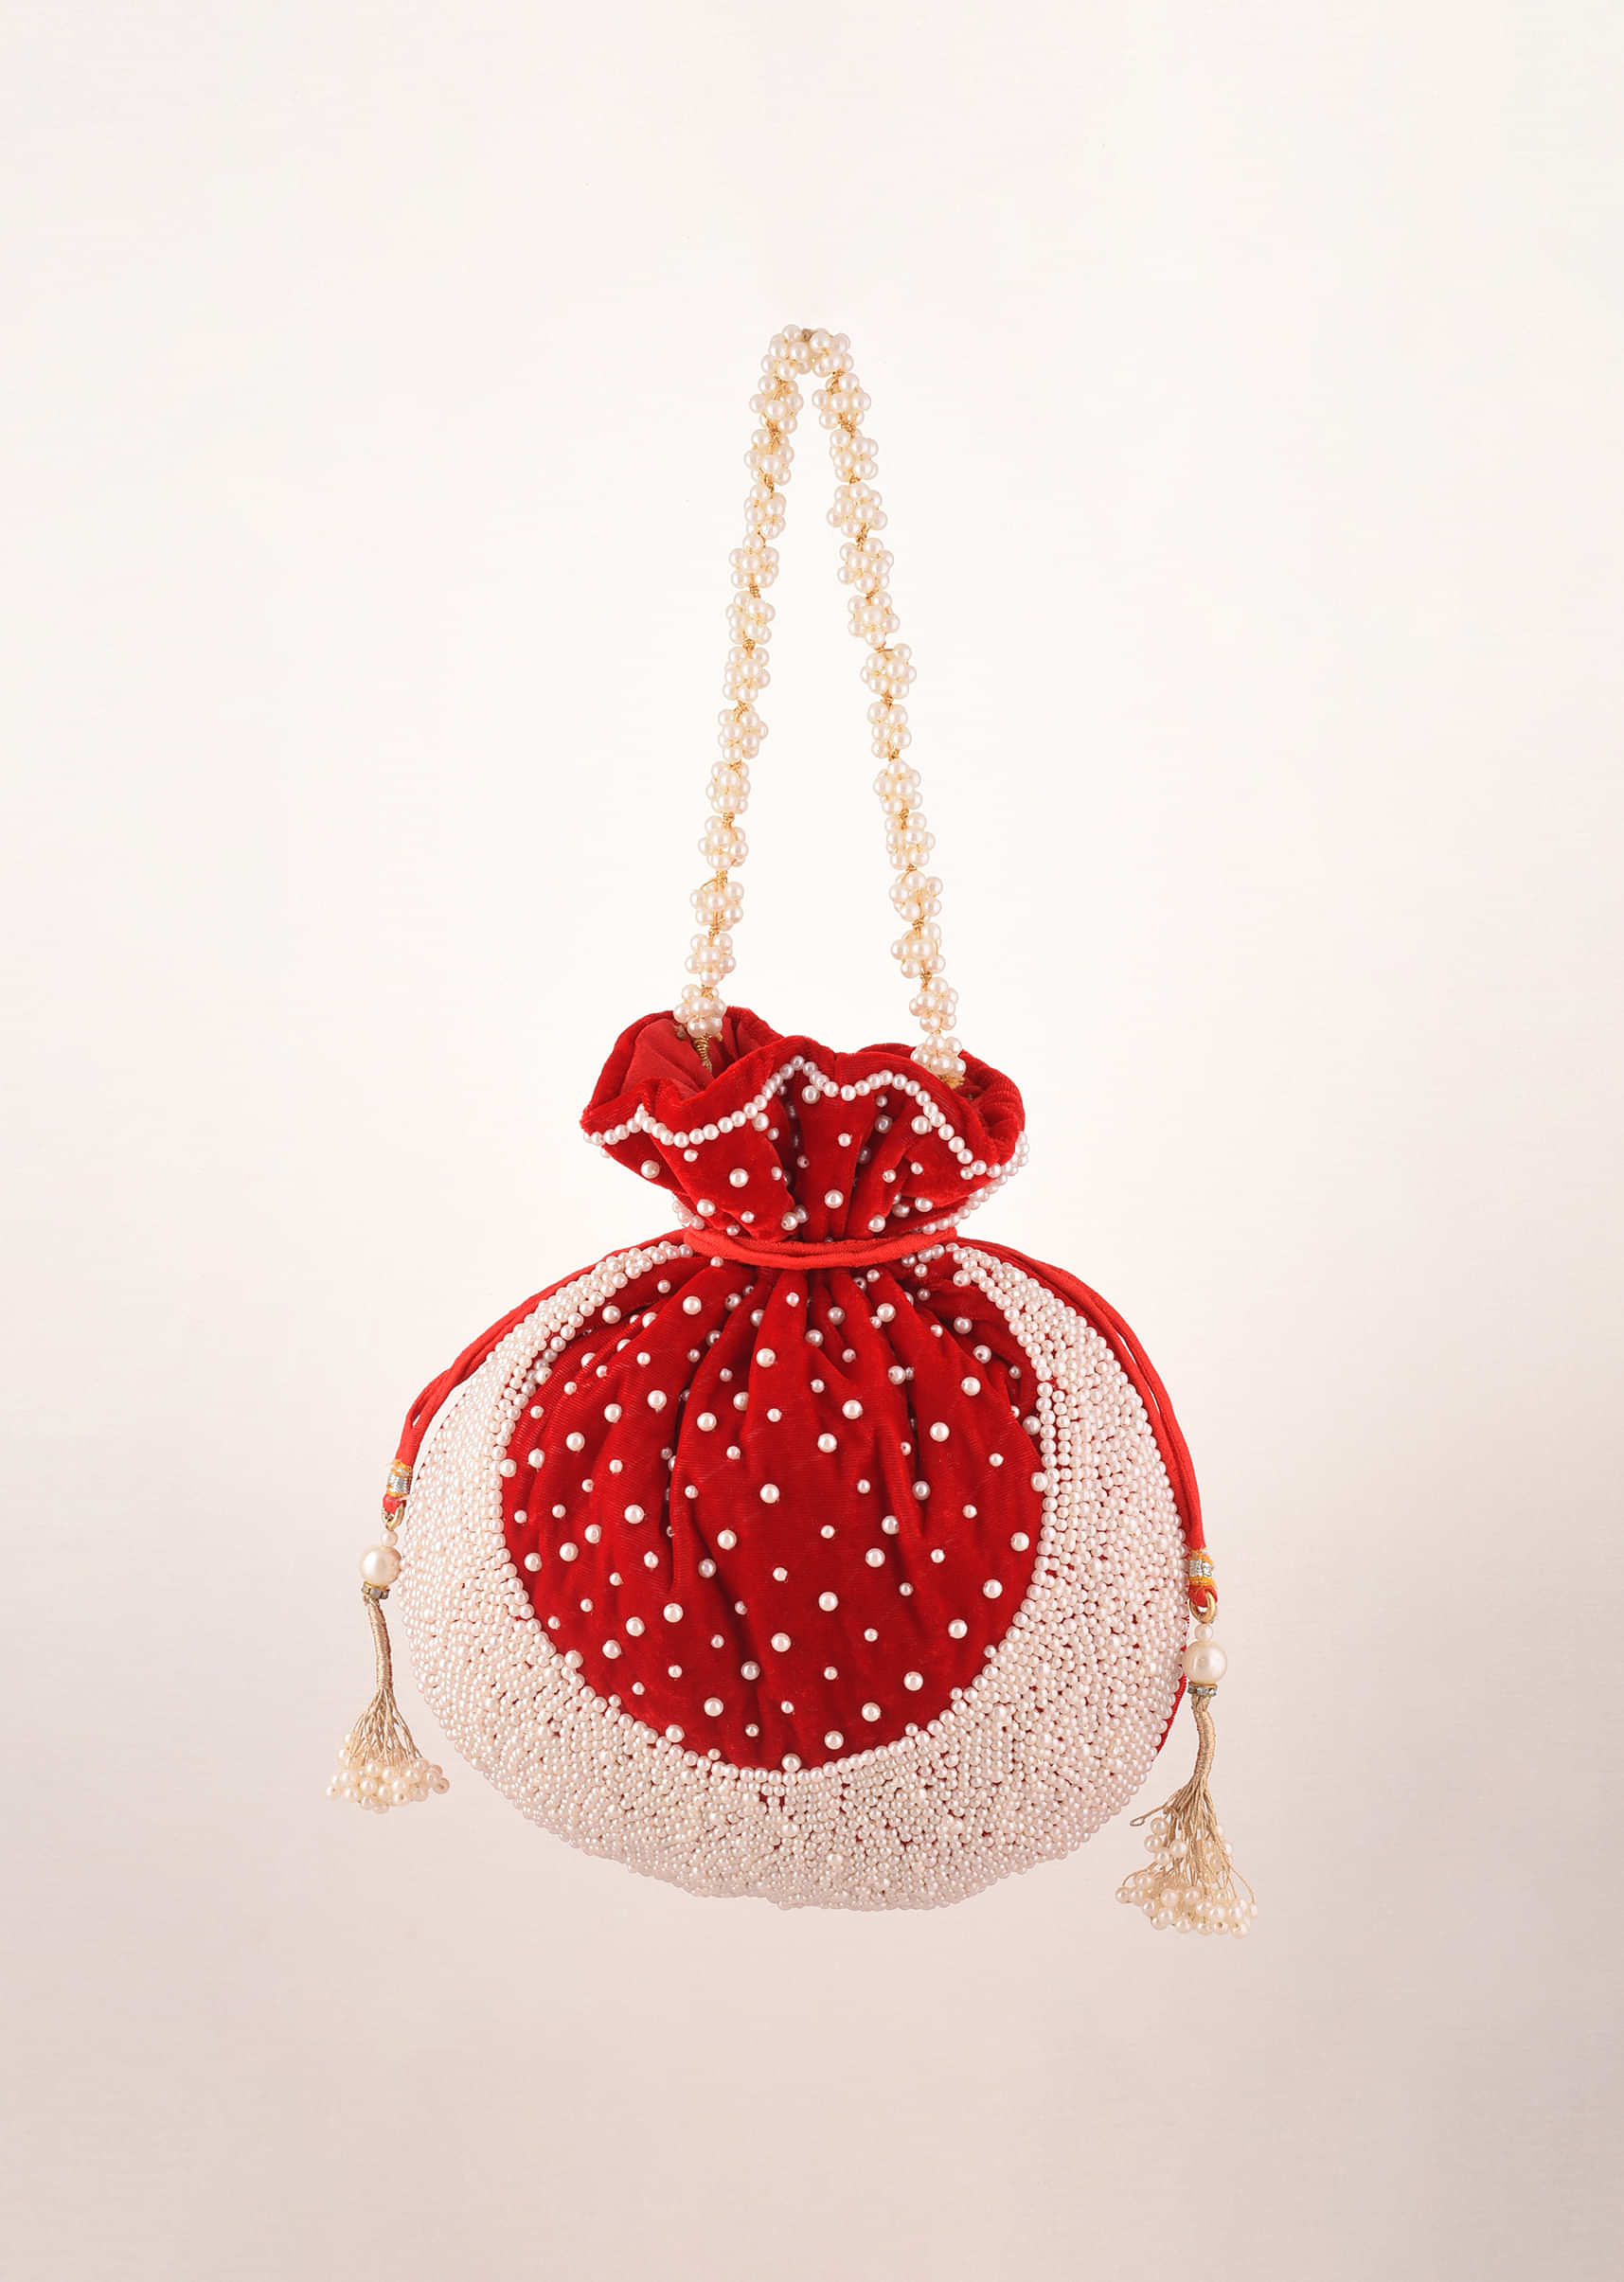 Cherry Red Potli Bag In Velvet With Moti Work In Crescent Design Along The Edge And Scattered In The Centre By Shubham